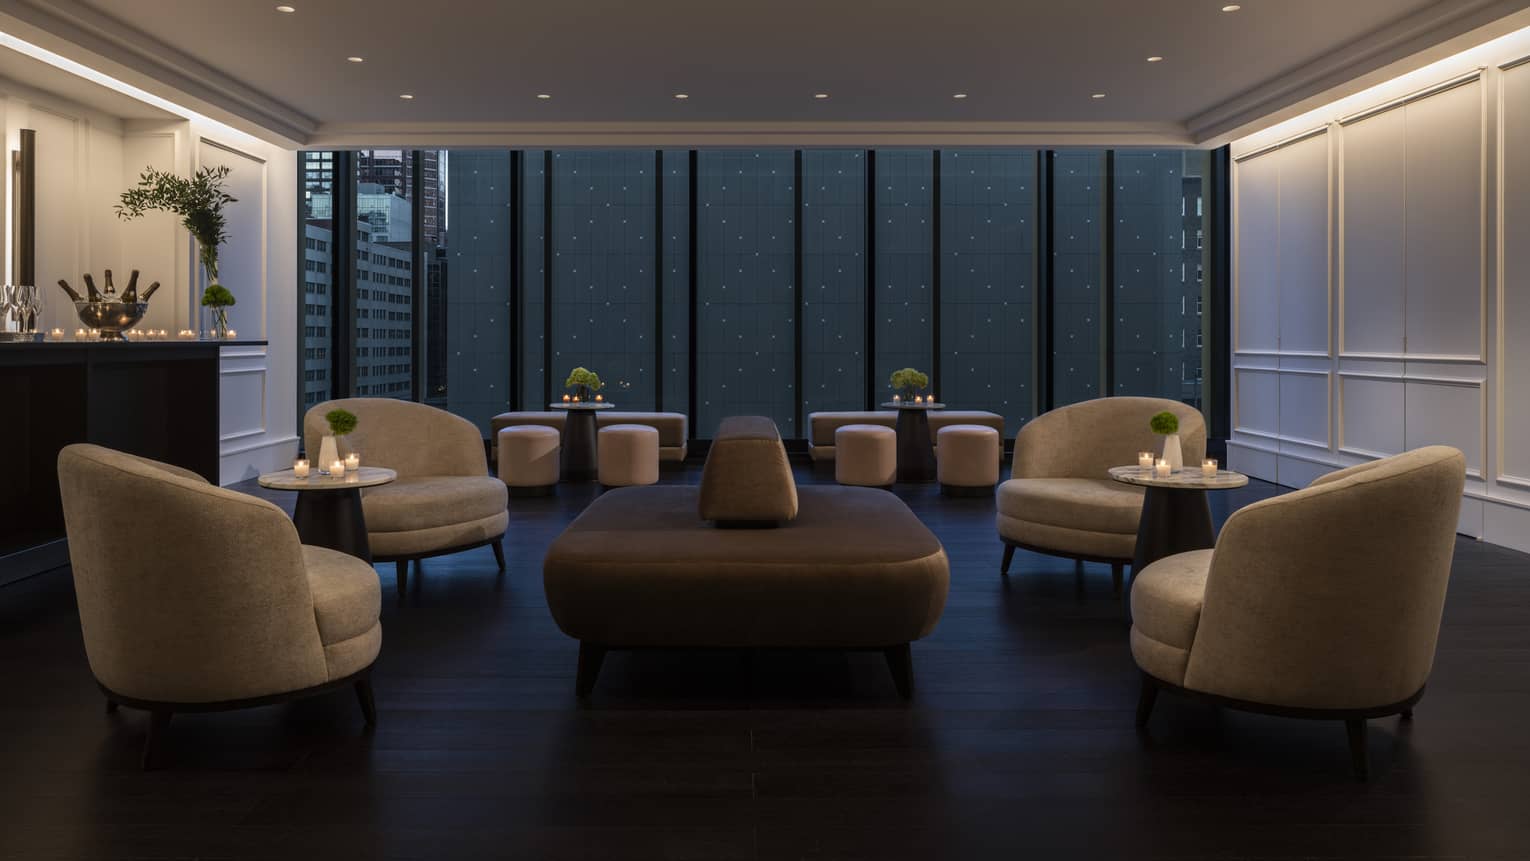 Curved modern club chairs and a central bench fill the dimly lit Hotel foyer